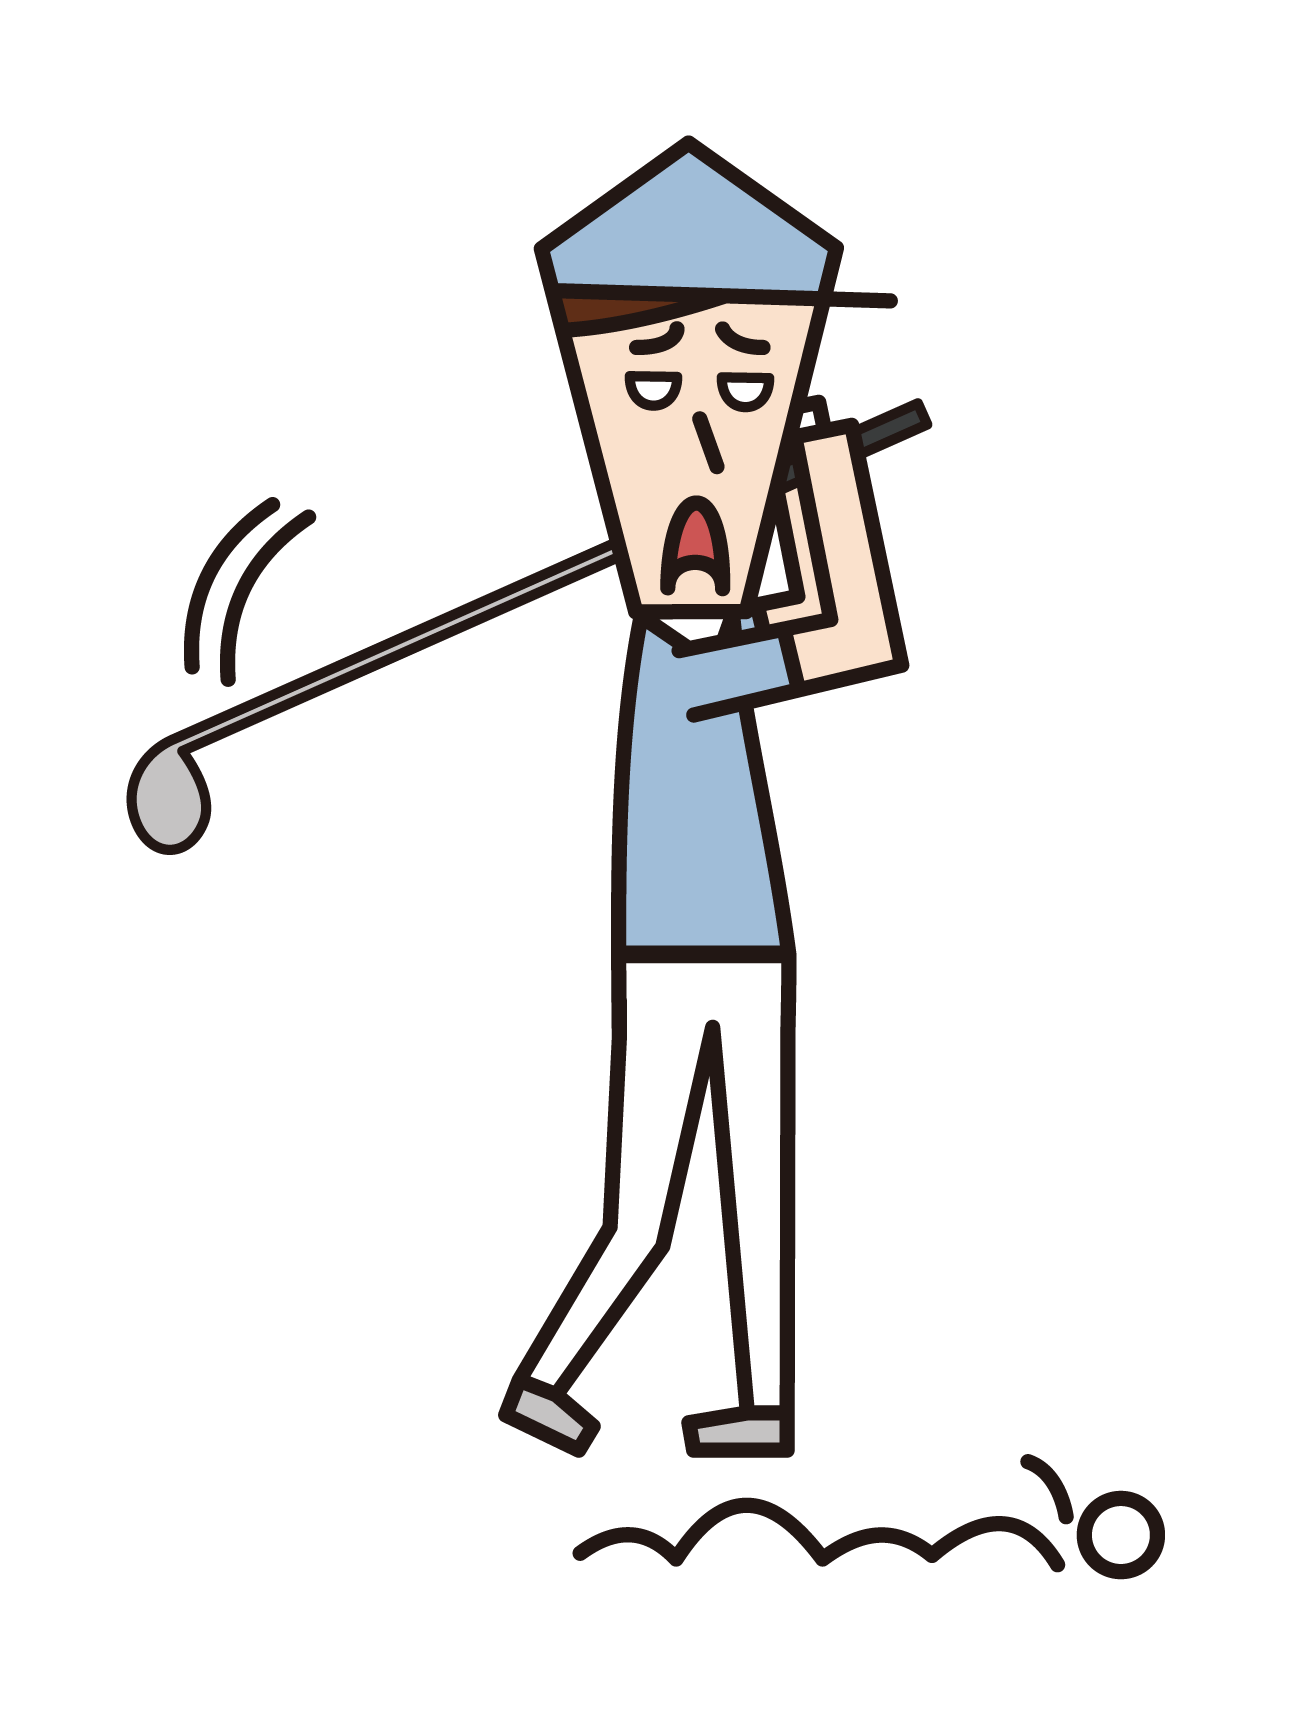 Illustration of a man who makes a mistake shot at golf